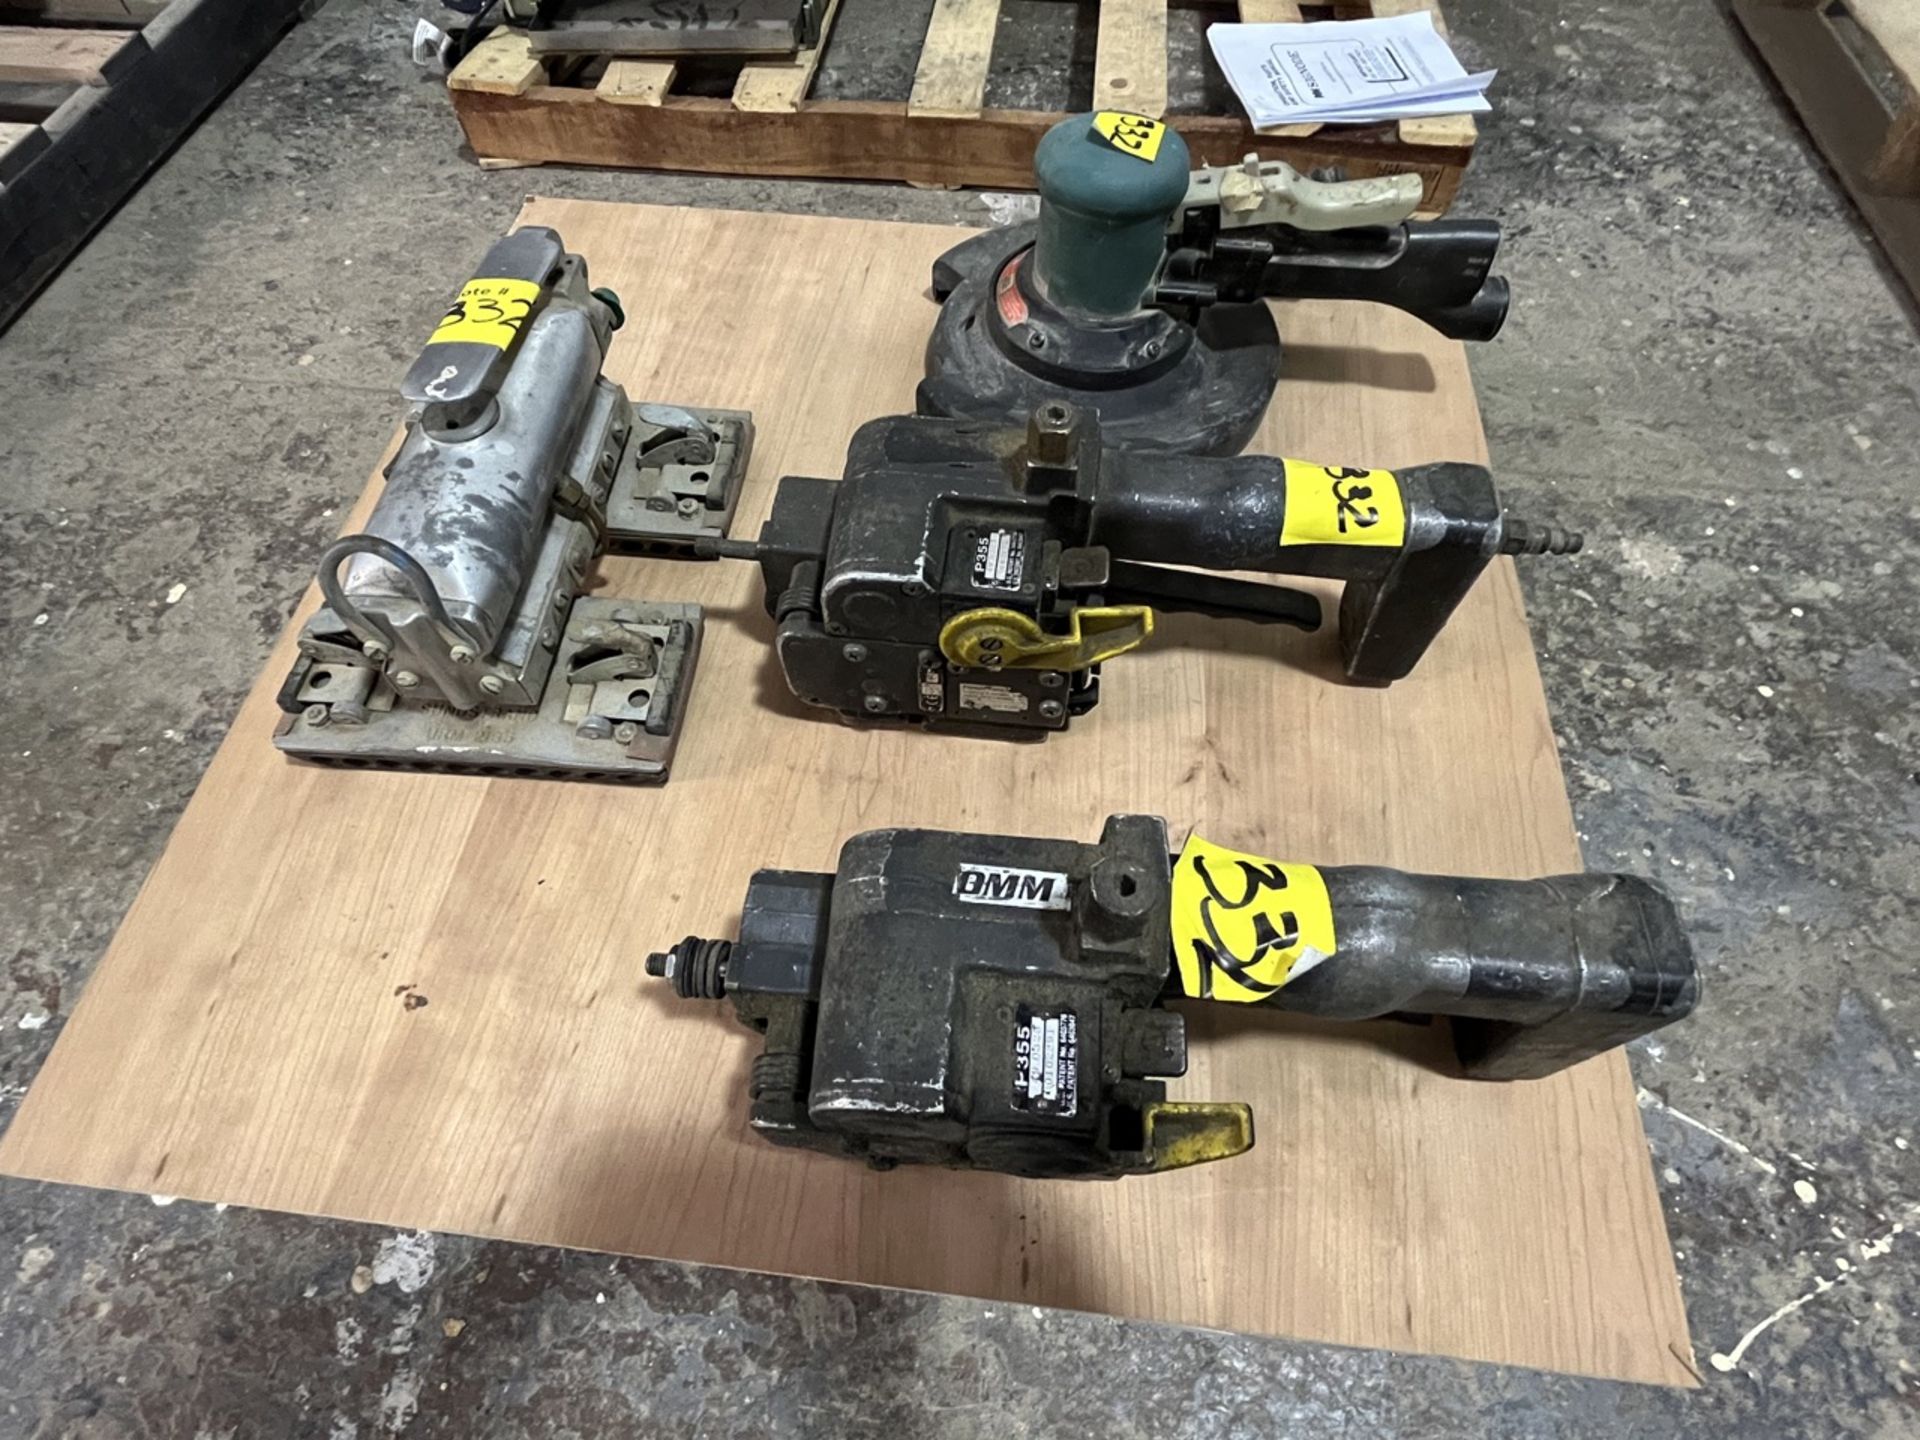 Lot of 4 pieces contains: 2 Fromm brand pneumatic wood brushes; 1 Sundstrand brand pneumatic sander - Image 5 of 10